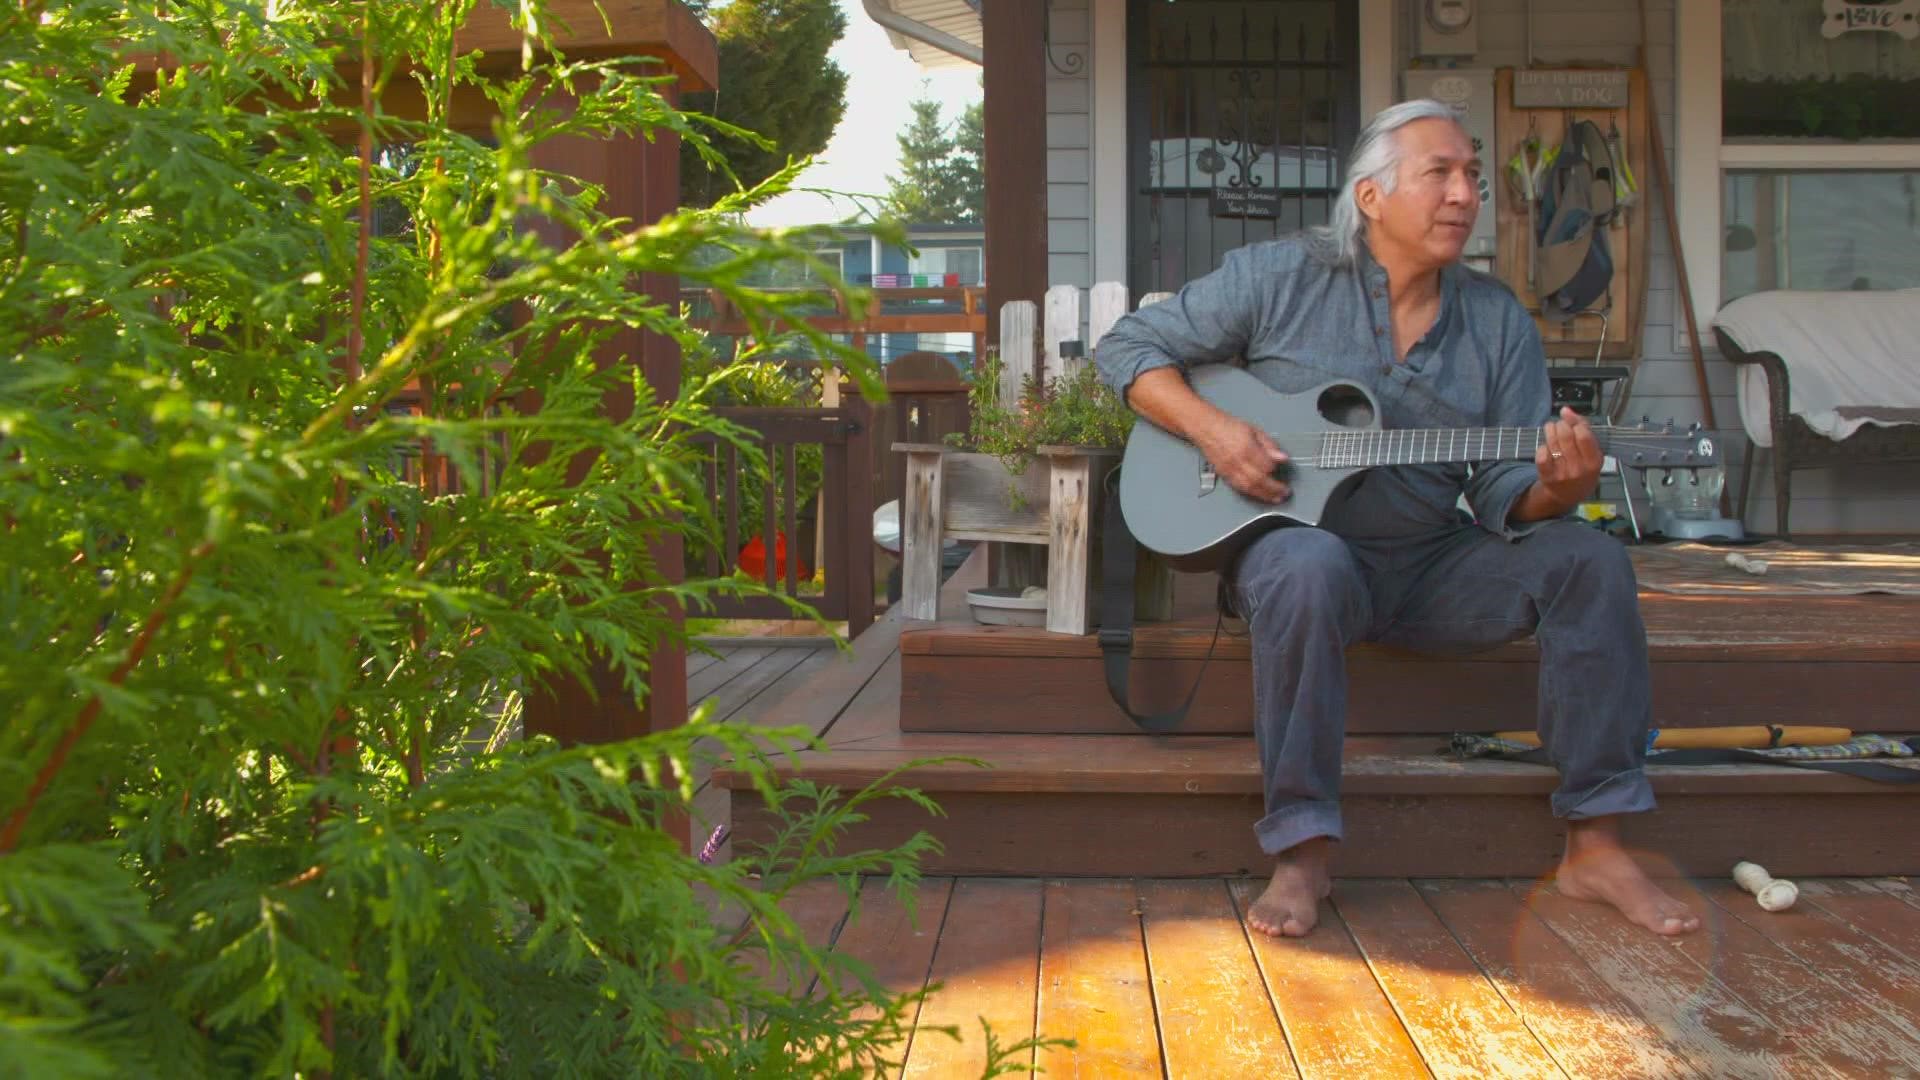 From a back porch in Tacoma, traditional Native chants blend with the sound of an acoustic guitar. Gene Tagaban is on a lifelong mission to answer one question.